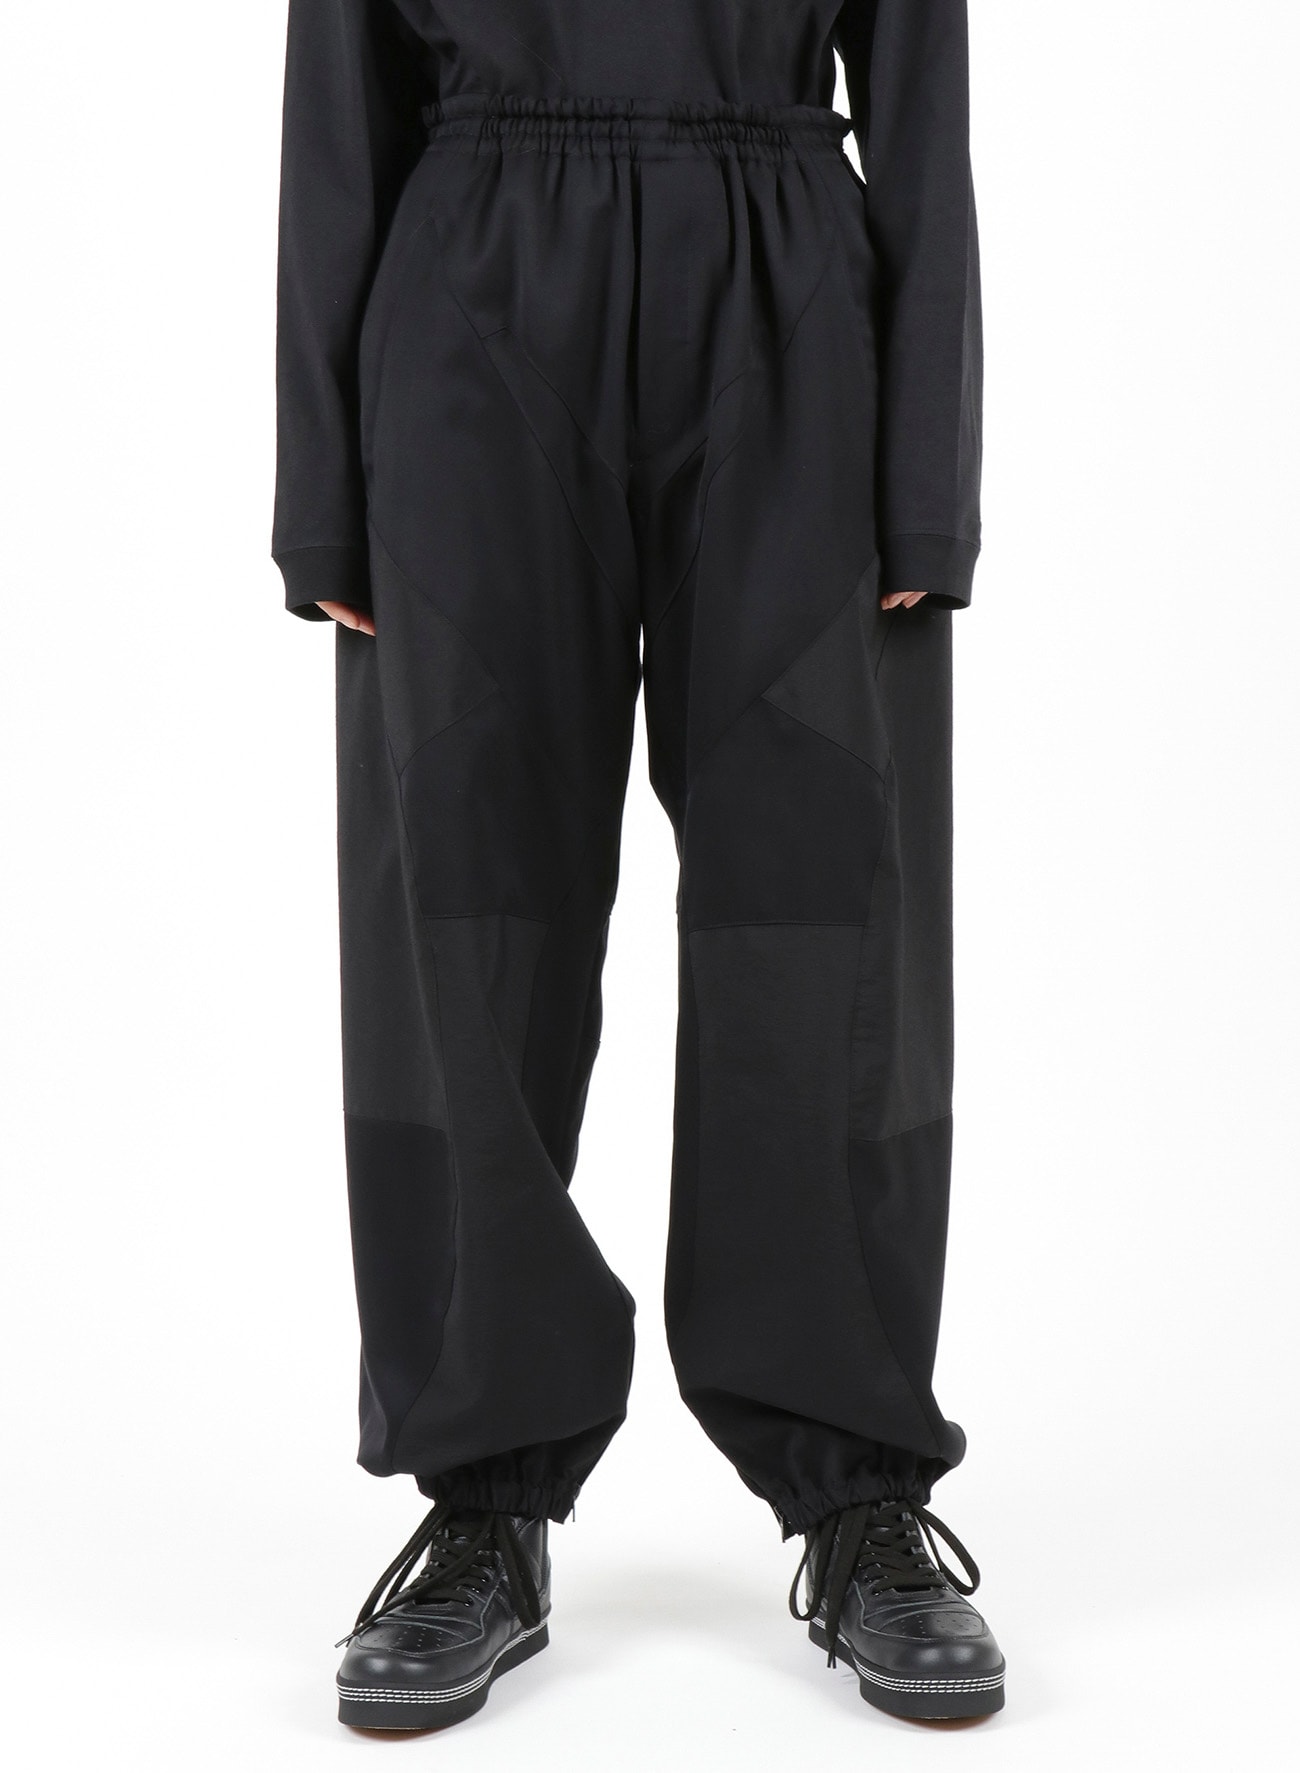 NYLON RAYON POLYESTER TUSSAH STRETCHPATCHED PANTS